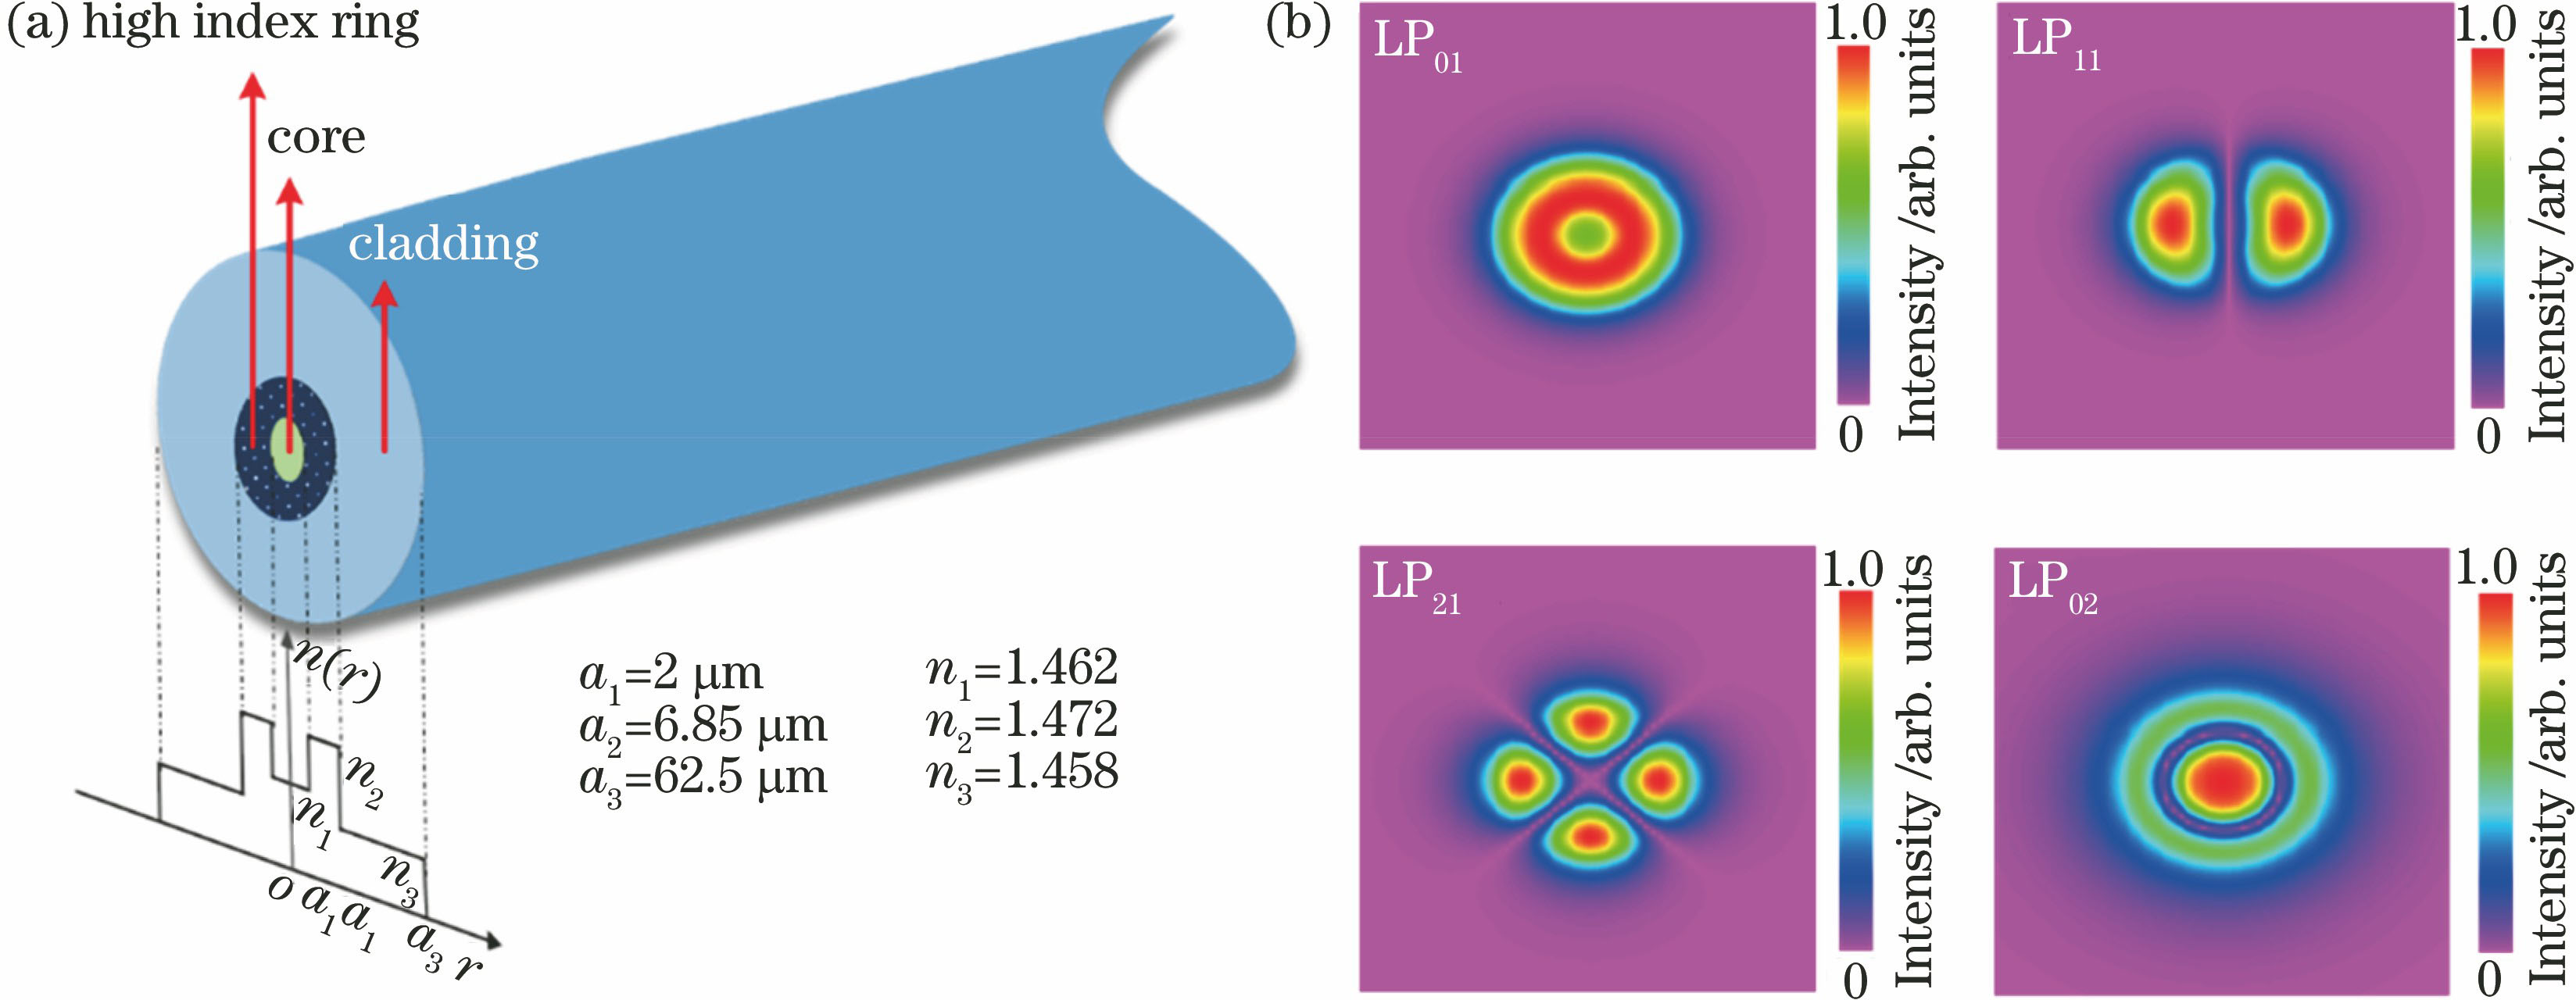 Annular-core fiber supporting second-order mode. (a) Structure and refractive index profile of annular-core fiber; (b) normalized field intensity profiles of LP01, LP11, LP21, and LP02 modes in annular-core fiber